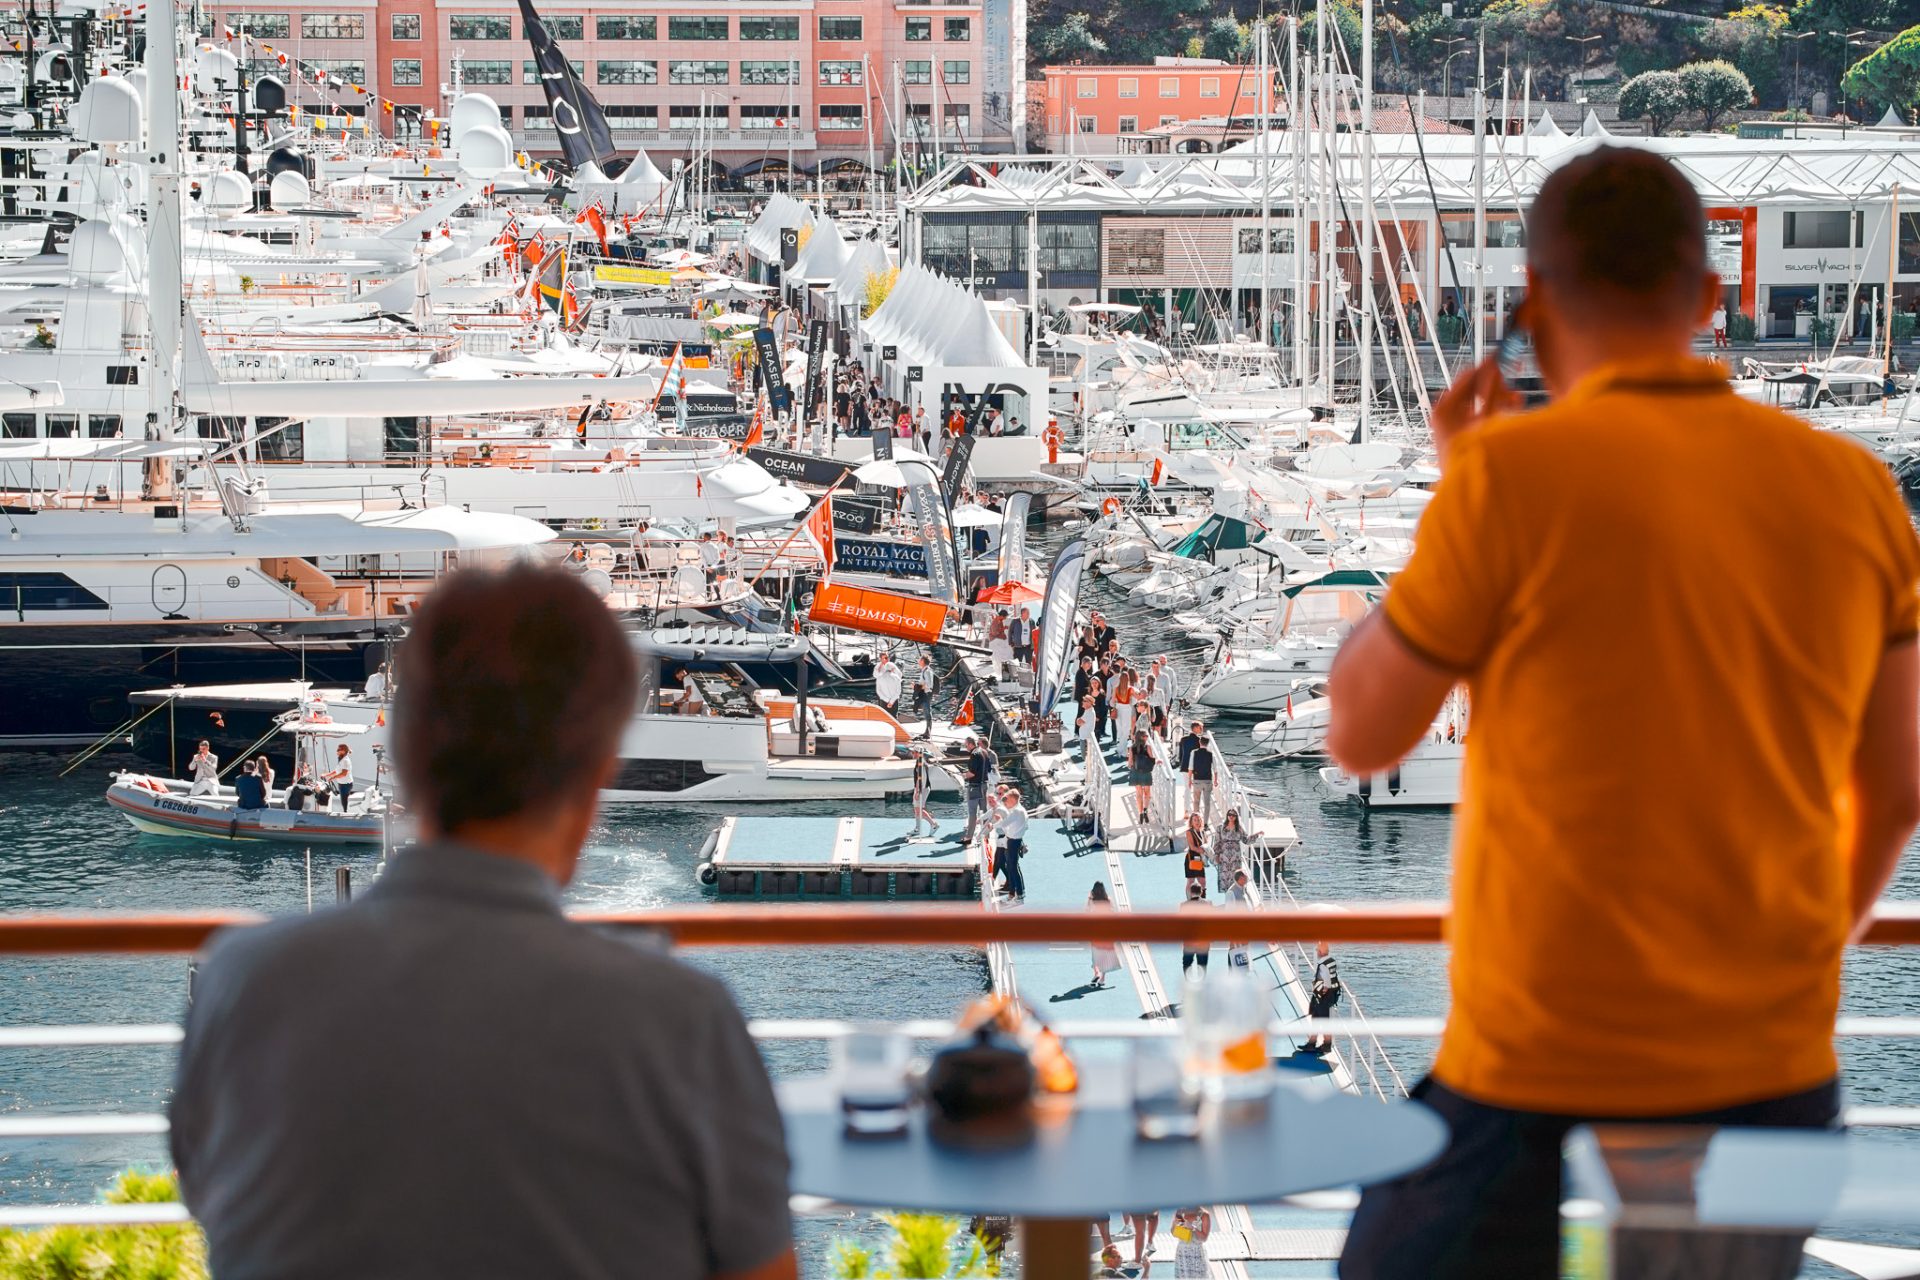 Monaco Yacht Show is a huge event for the whole of the yachting industry